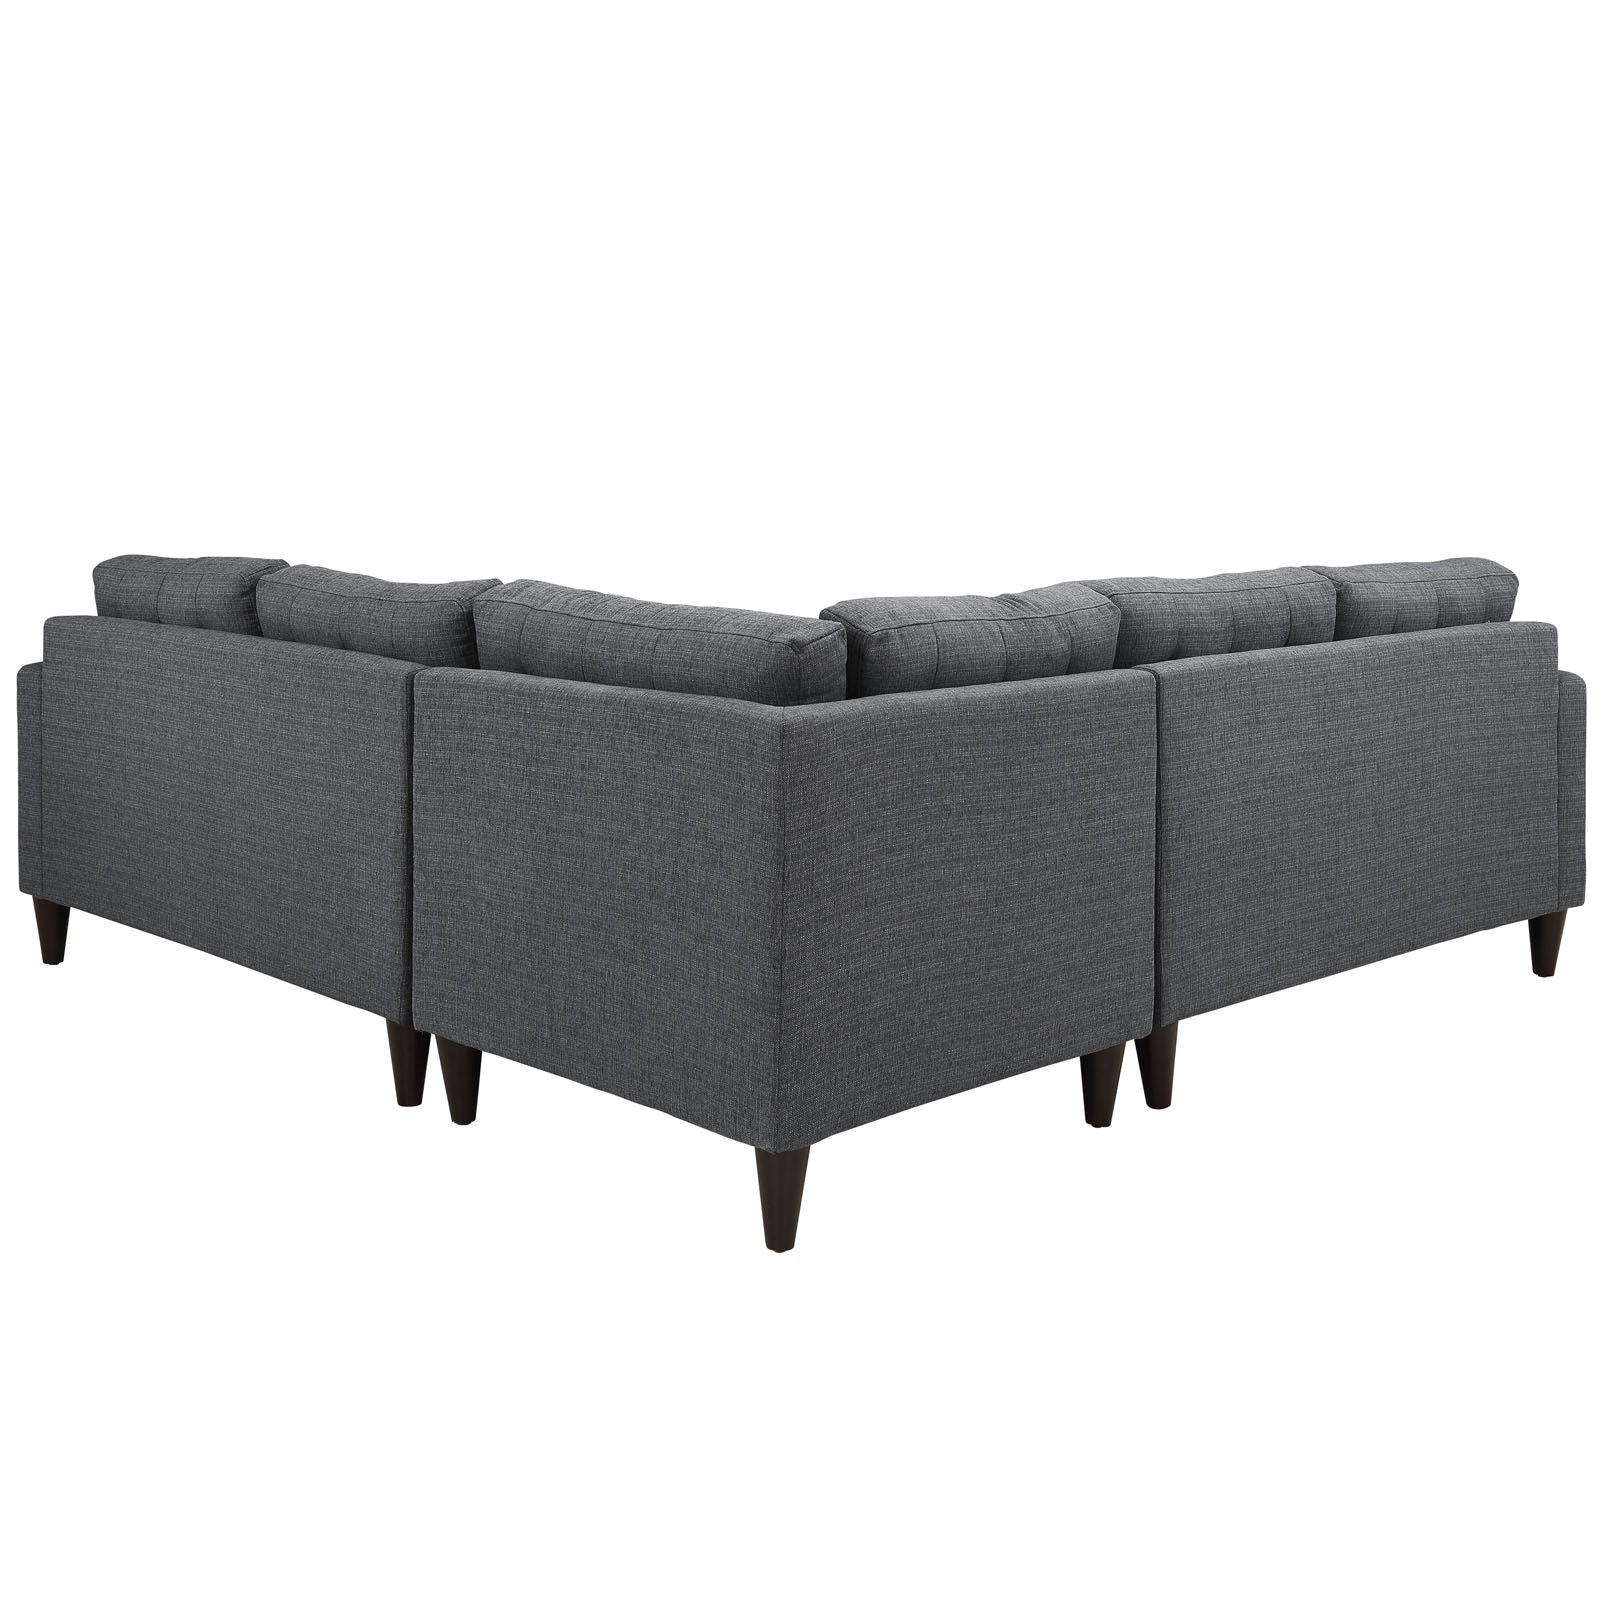 Modway Sectional Sofas - Empress 3 Piece Upholstered Fabric Sectional Sofa Set Gray